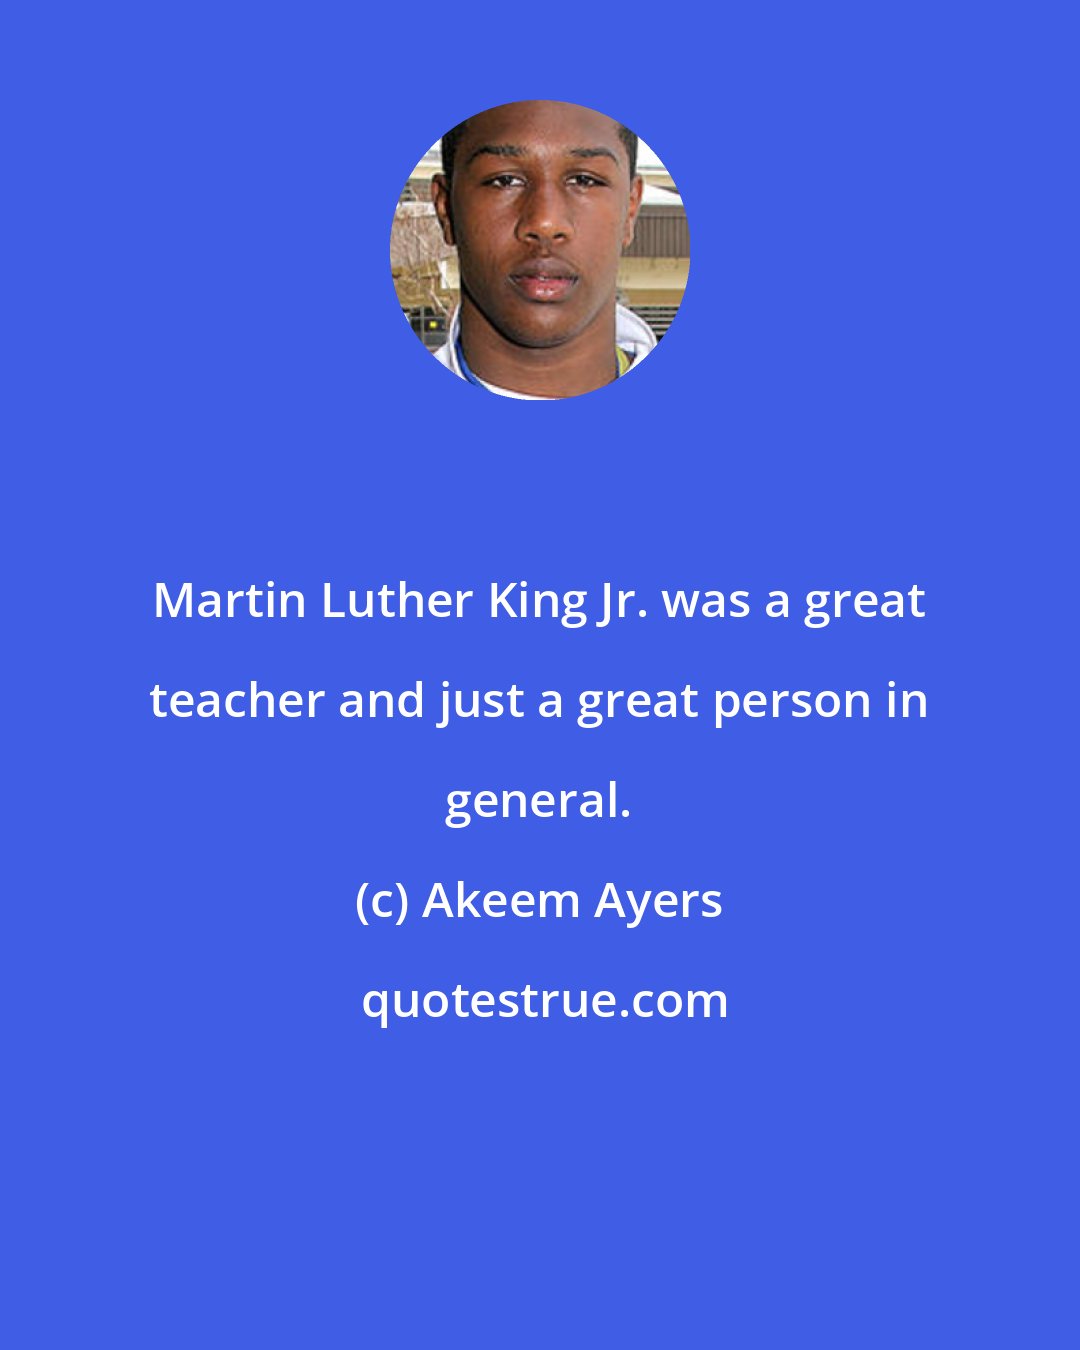 Akeem Ayers: Martin Luther King Jr. was a great teacher and just a great person in general.